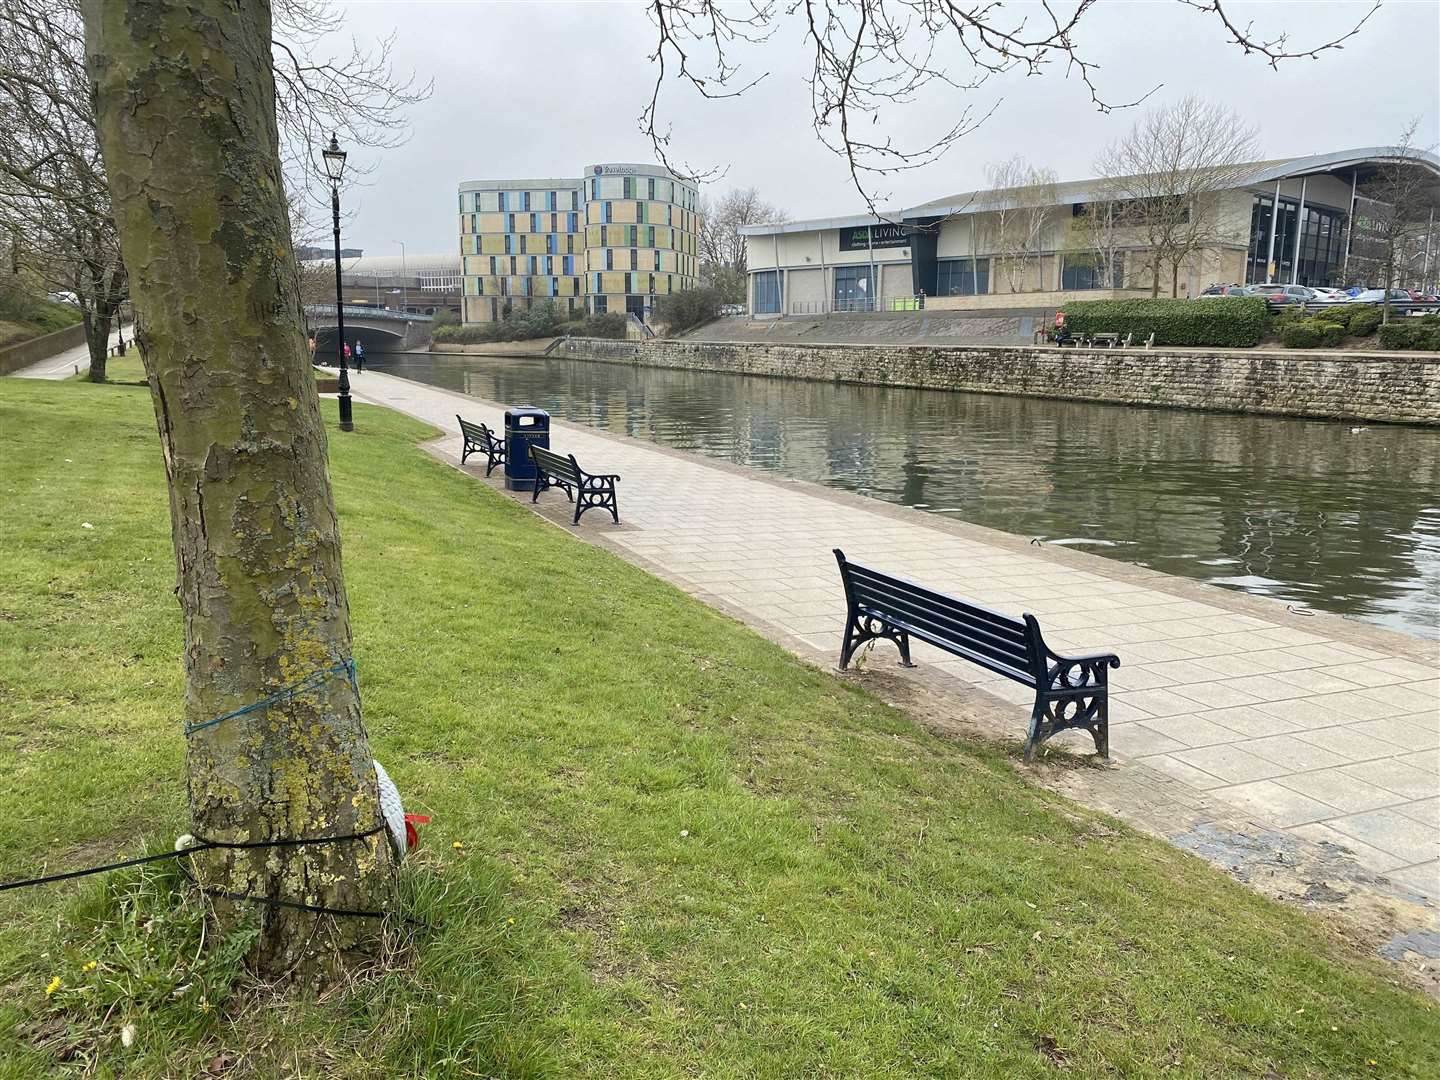 Many feel Maidstone has not made enough of its river